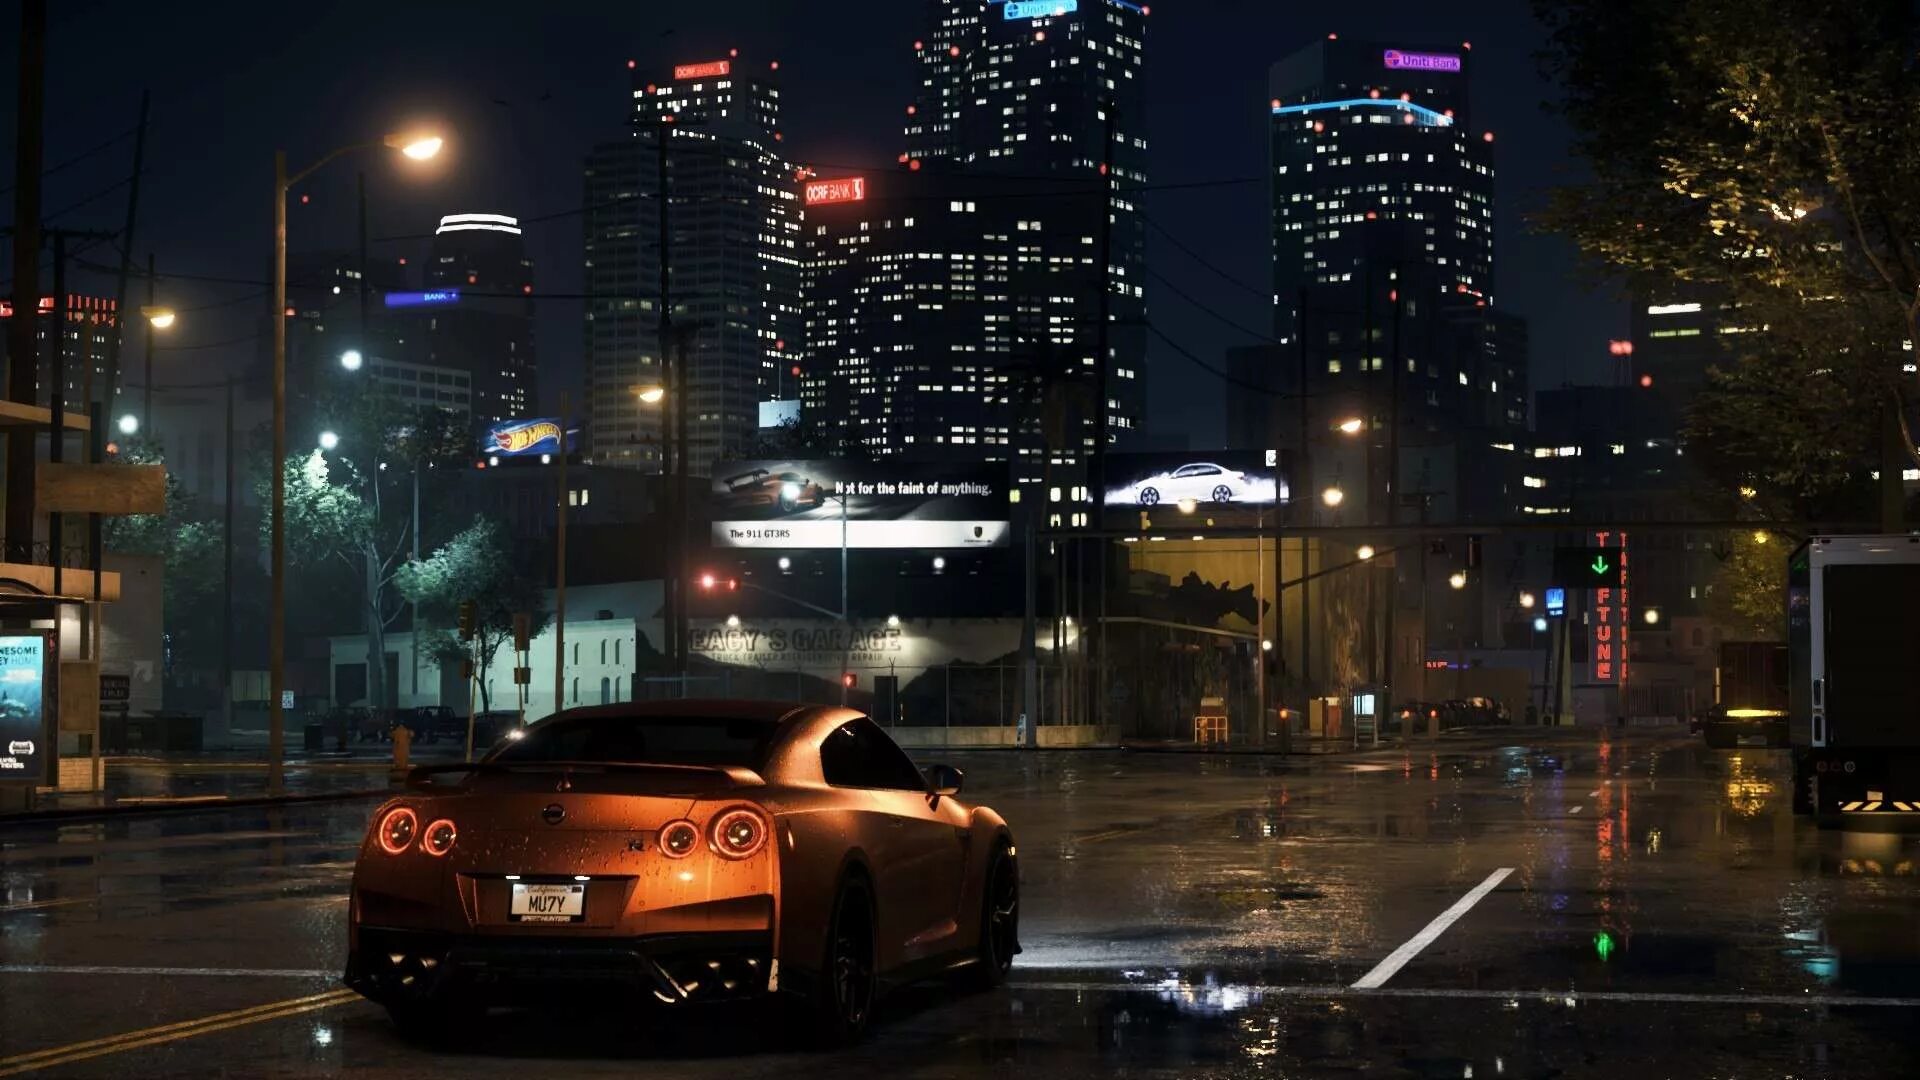 Nfs города. Need for Speed (игра, 2015). Город в need for Speed 2015. Ниндфорд СПИД 2015. NFS need for Speed 2015.